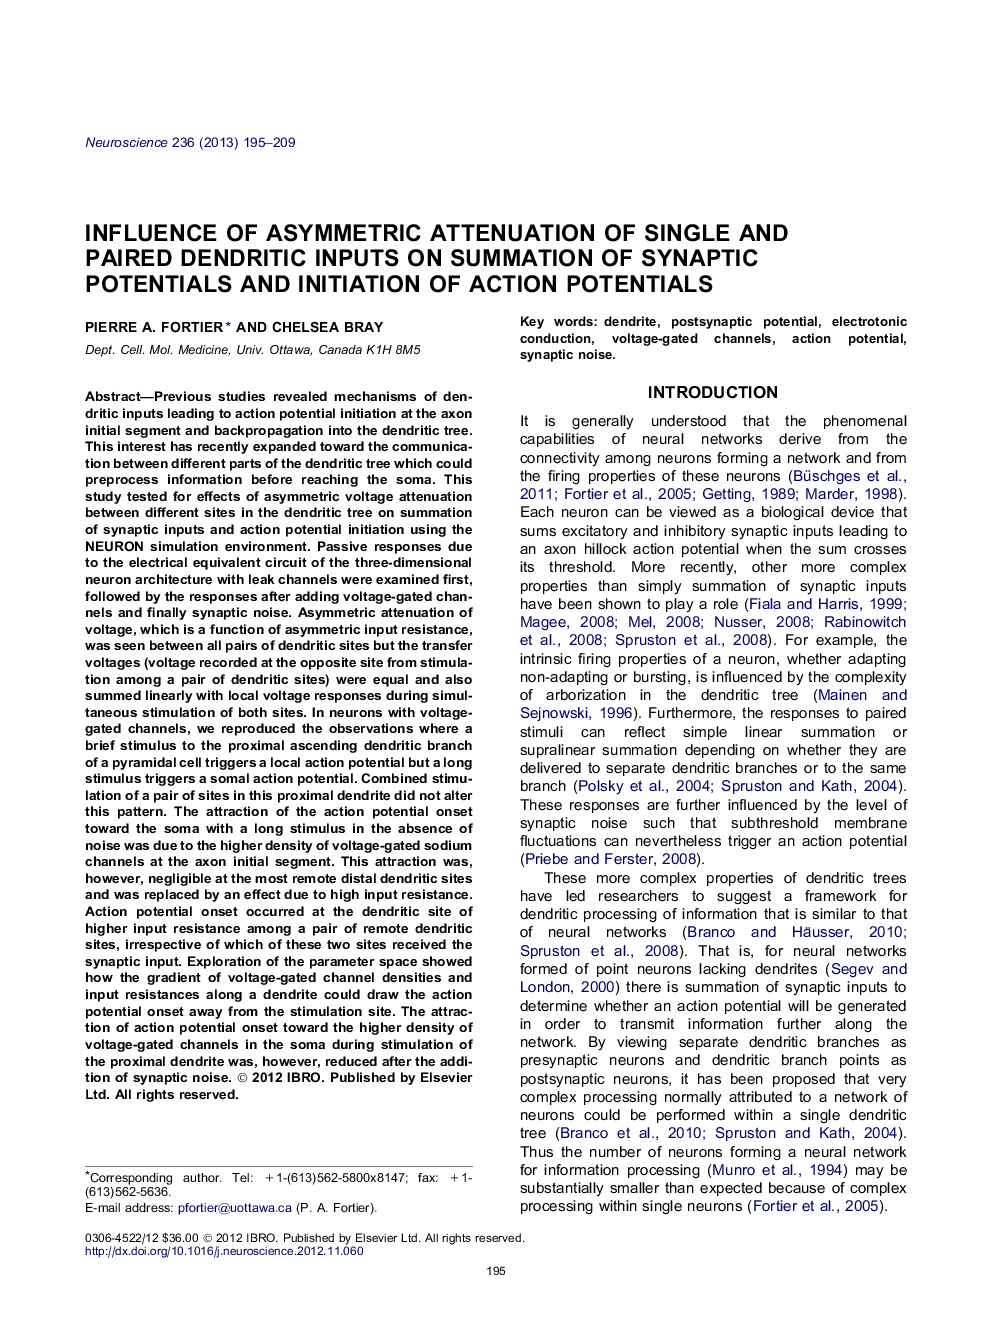 Influence of asymmetric attenuation of single and paired dendritic inputs on summation of synaptic potentials and initiation of action potentials